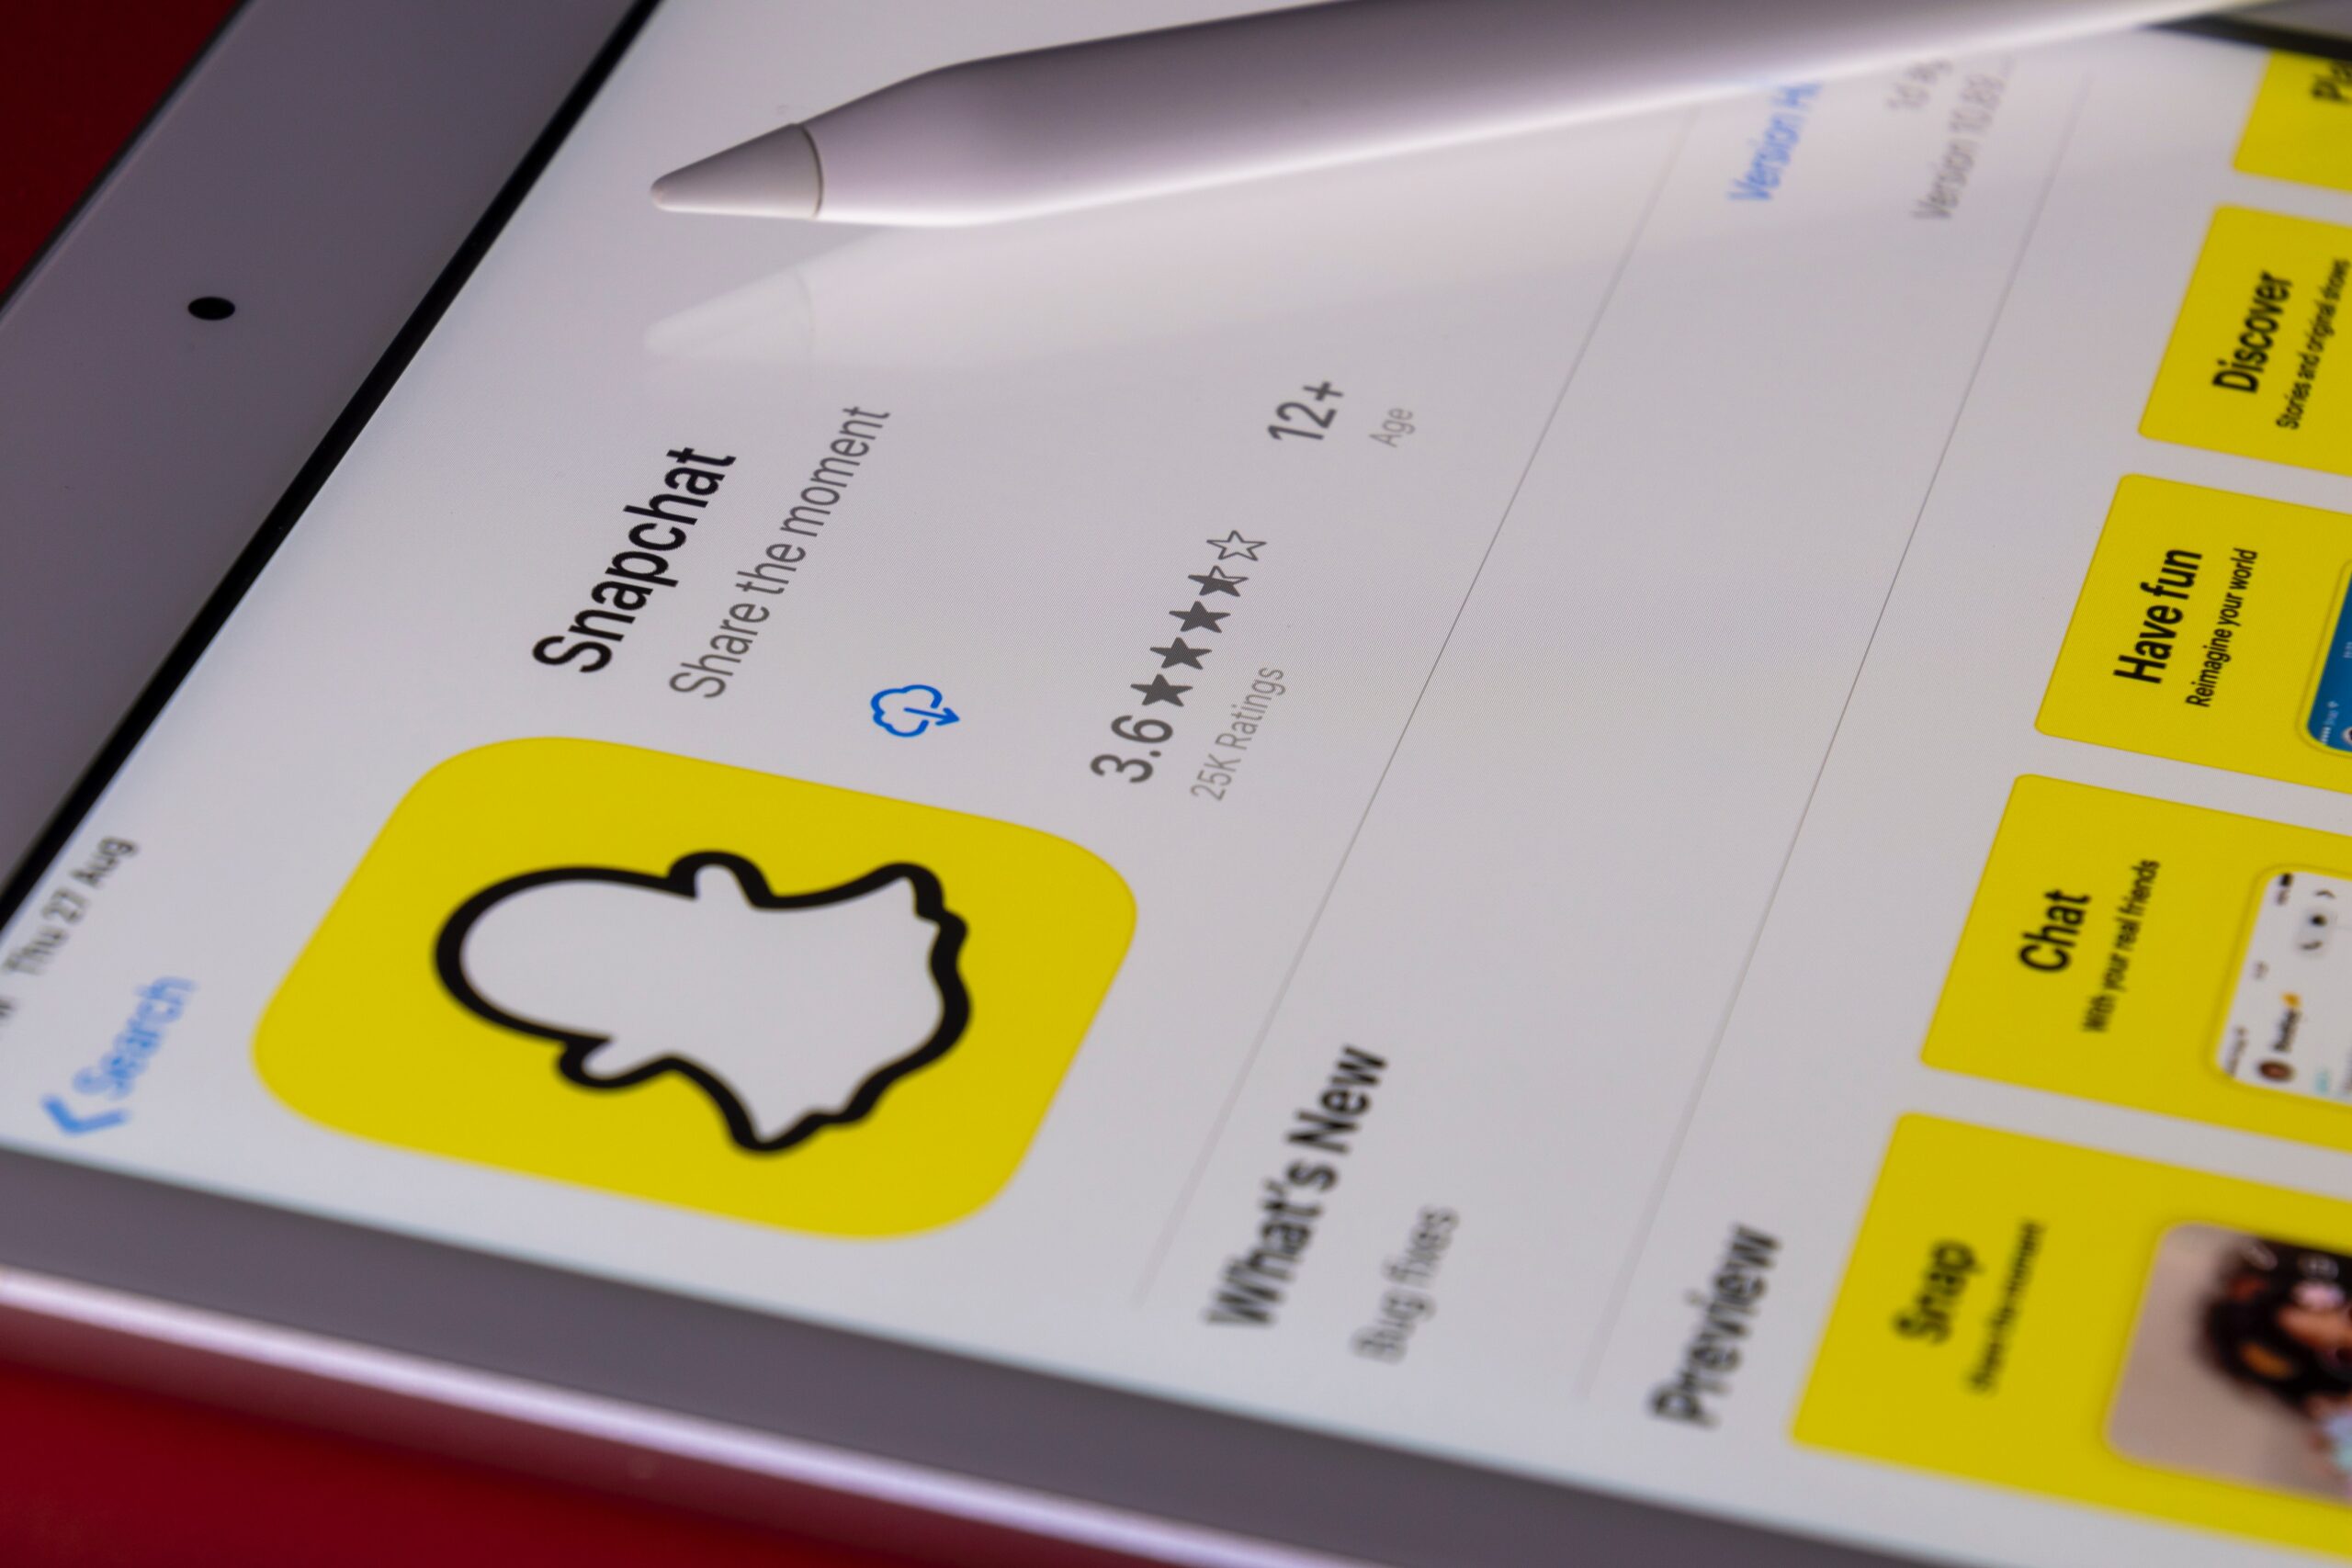 New advertising service for travel advertisers by Snapchat